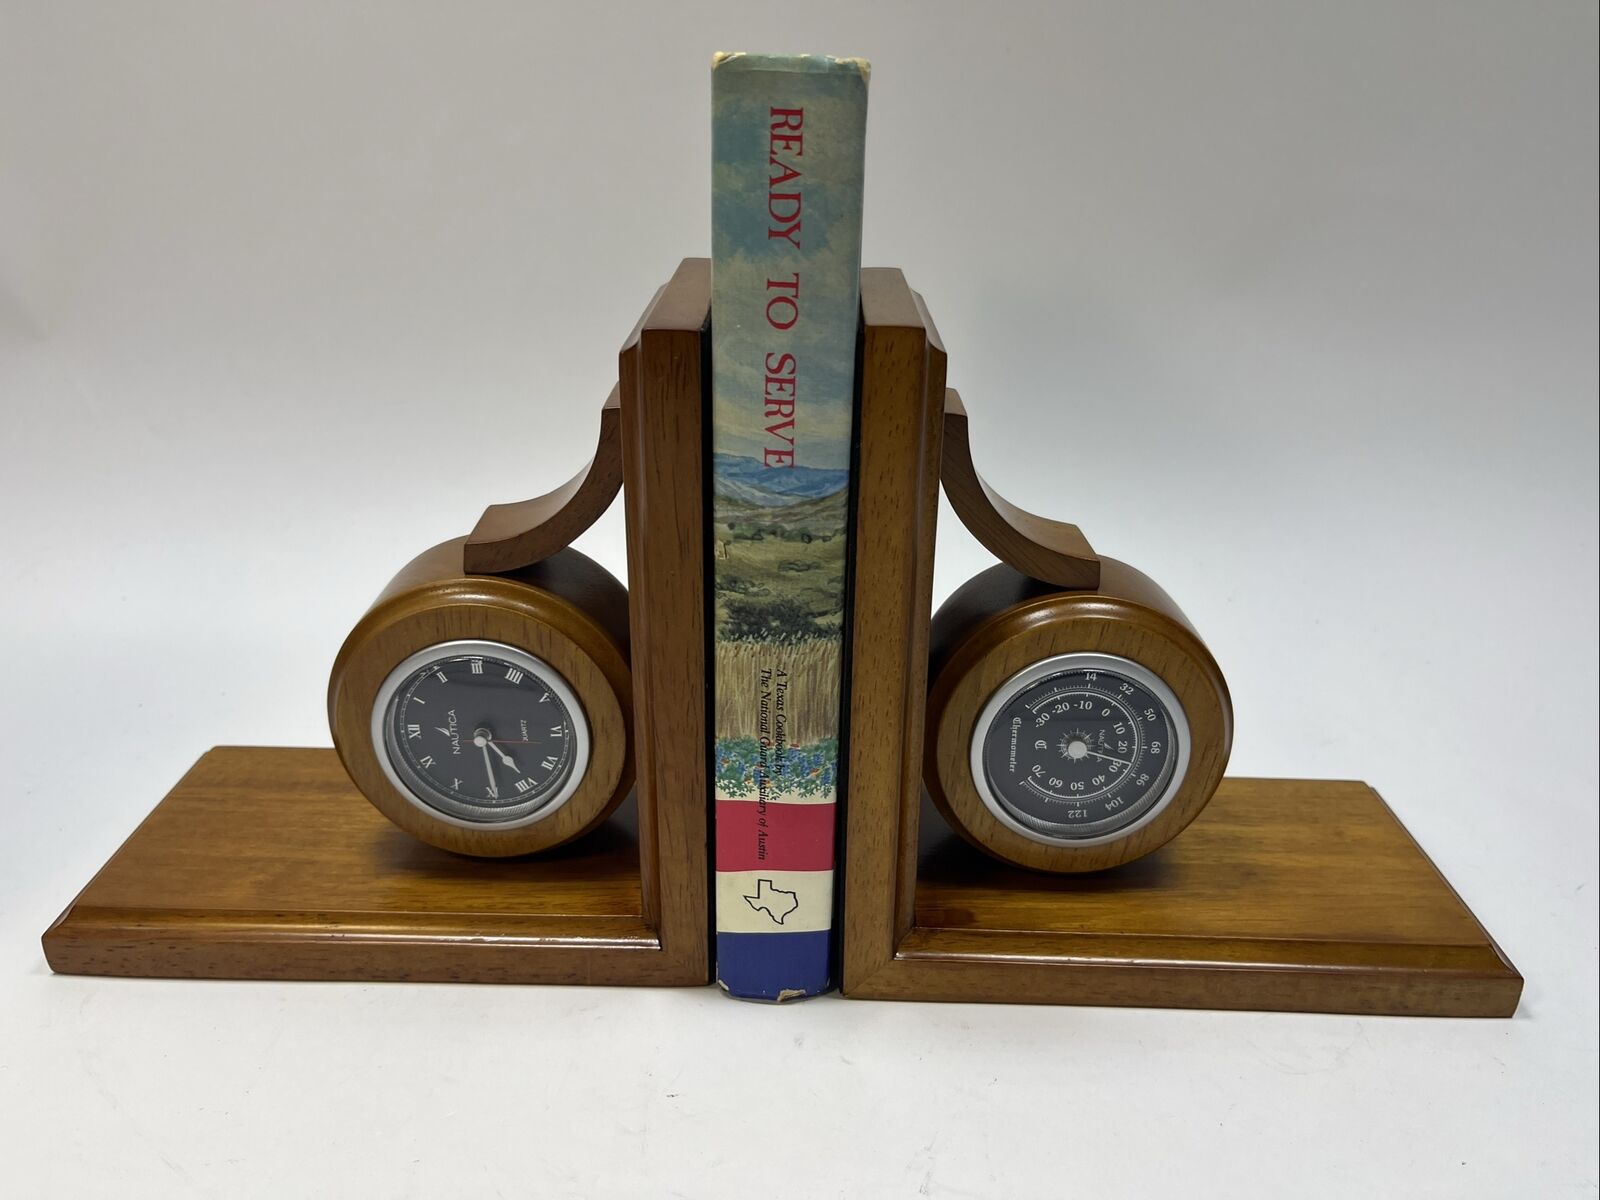 RARE NAUTICA CLOCK & THERMOMETER PAIR OF WOODEN BOOKENDS